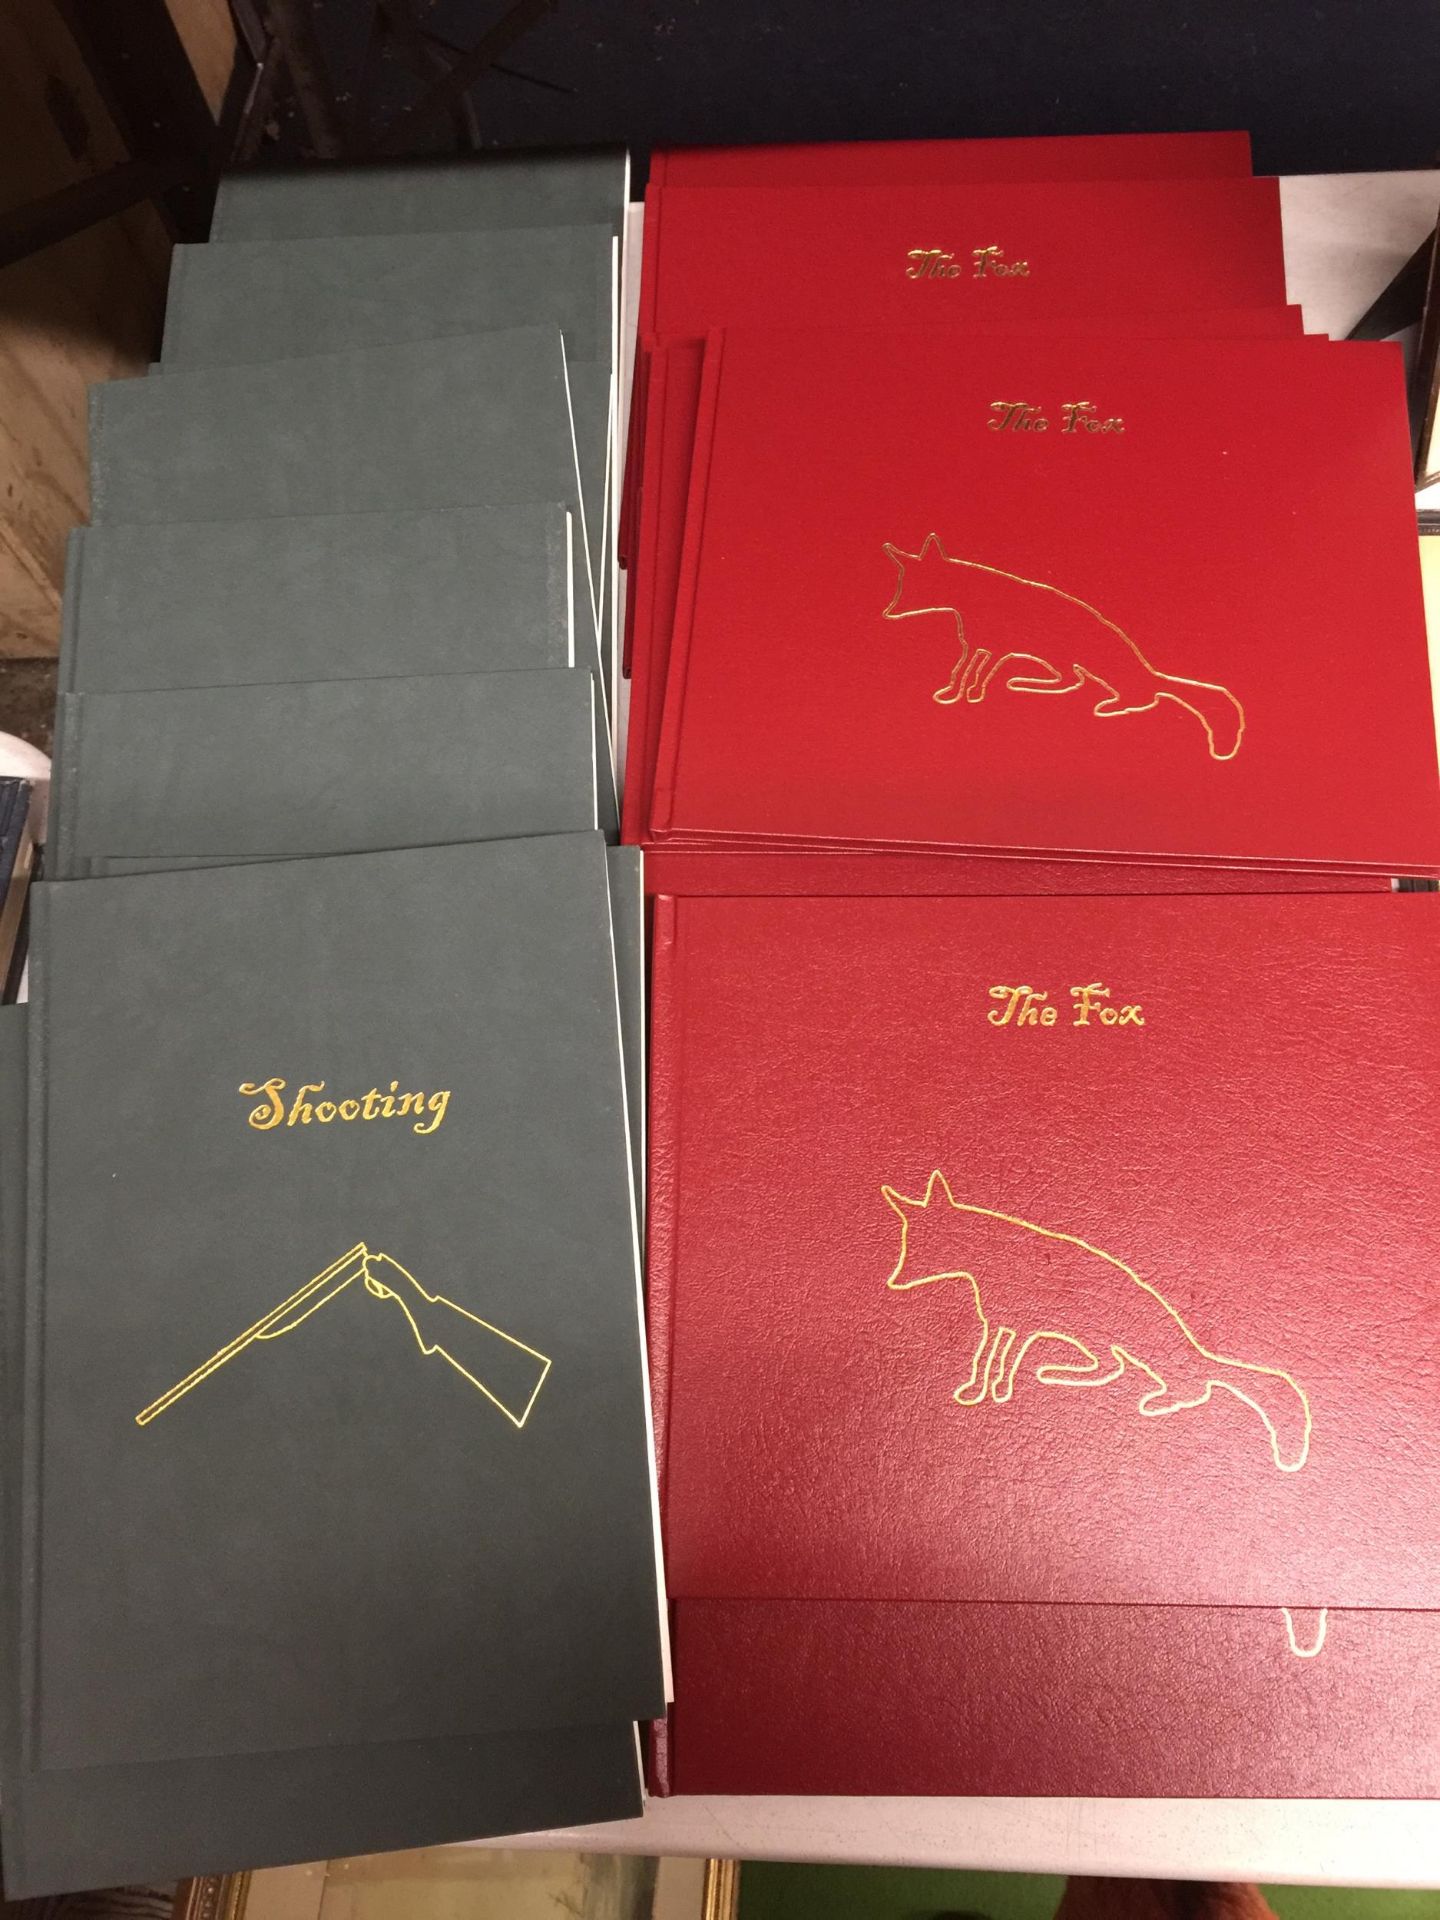 TEN COPIES OF 'THE FOX' AND 'SHOOTING' PRESENTED BY JOHN DERRICK - AS NEW